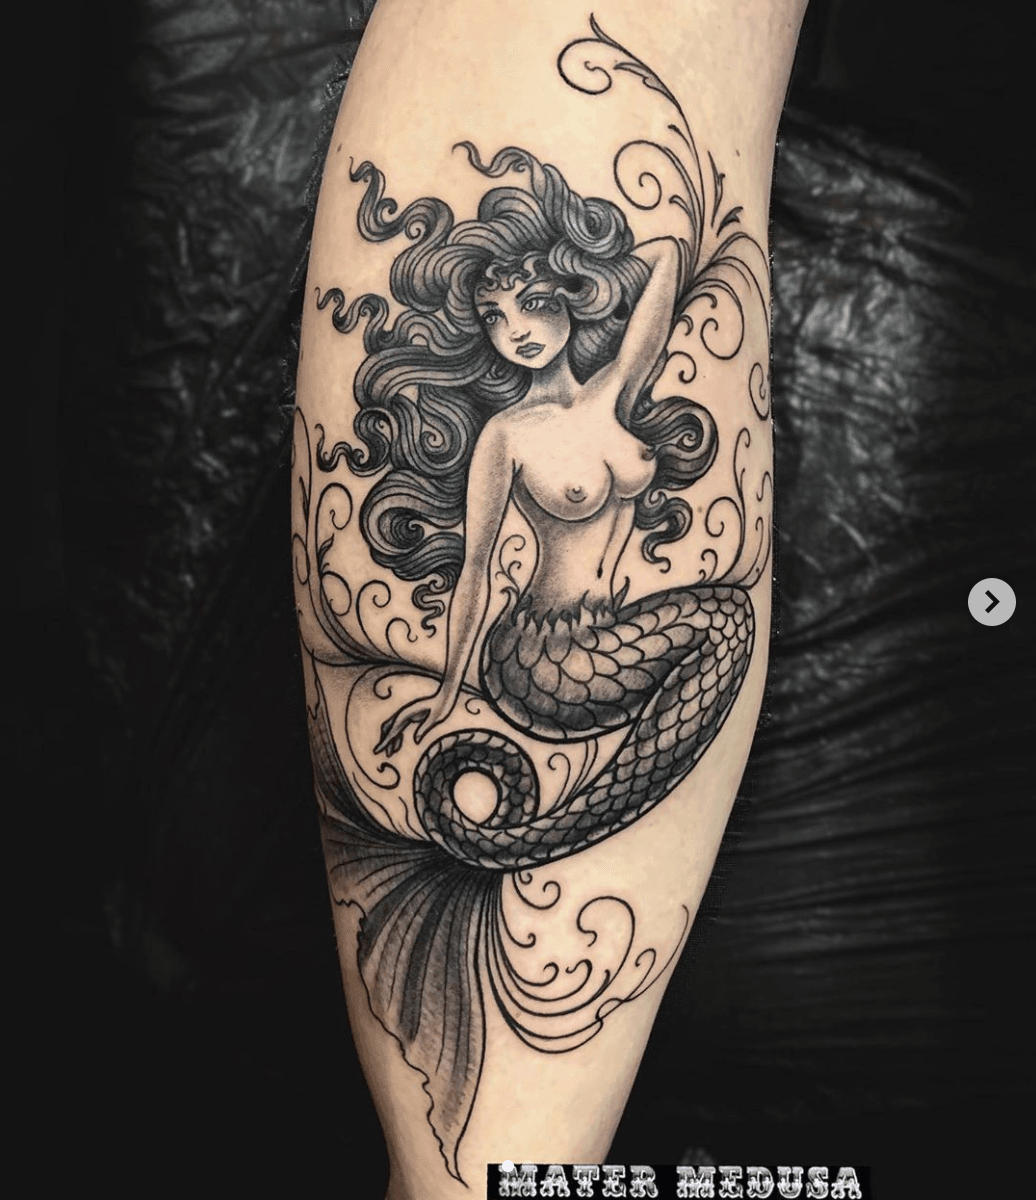 Tattoo uploaded by Claudia Ducalia aka Mater Medusa • ✨This piece is from  my third day at the @londontattooconvention ✨thanks to my lovely client  @kerryn_b93 and thanks to everyone who makes this